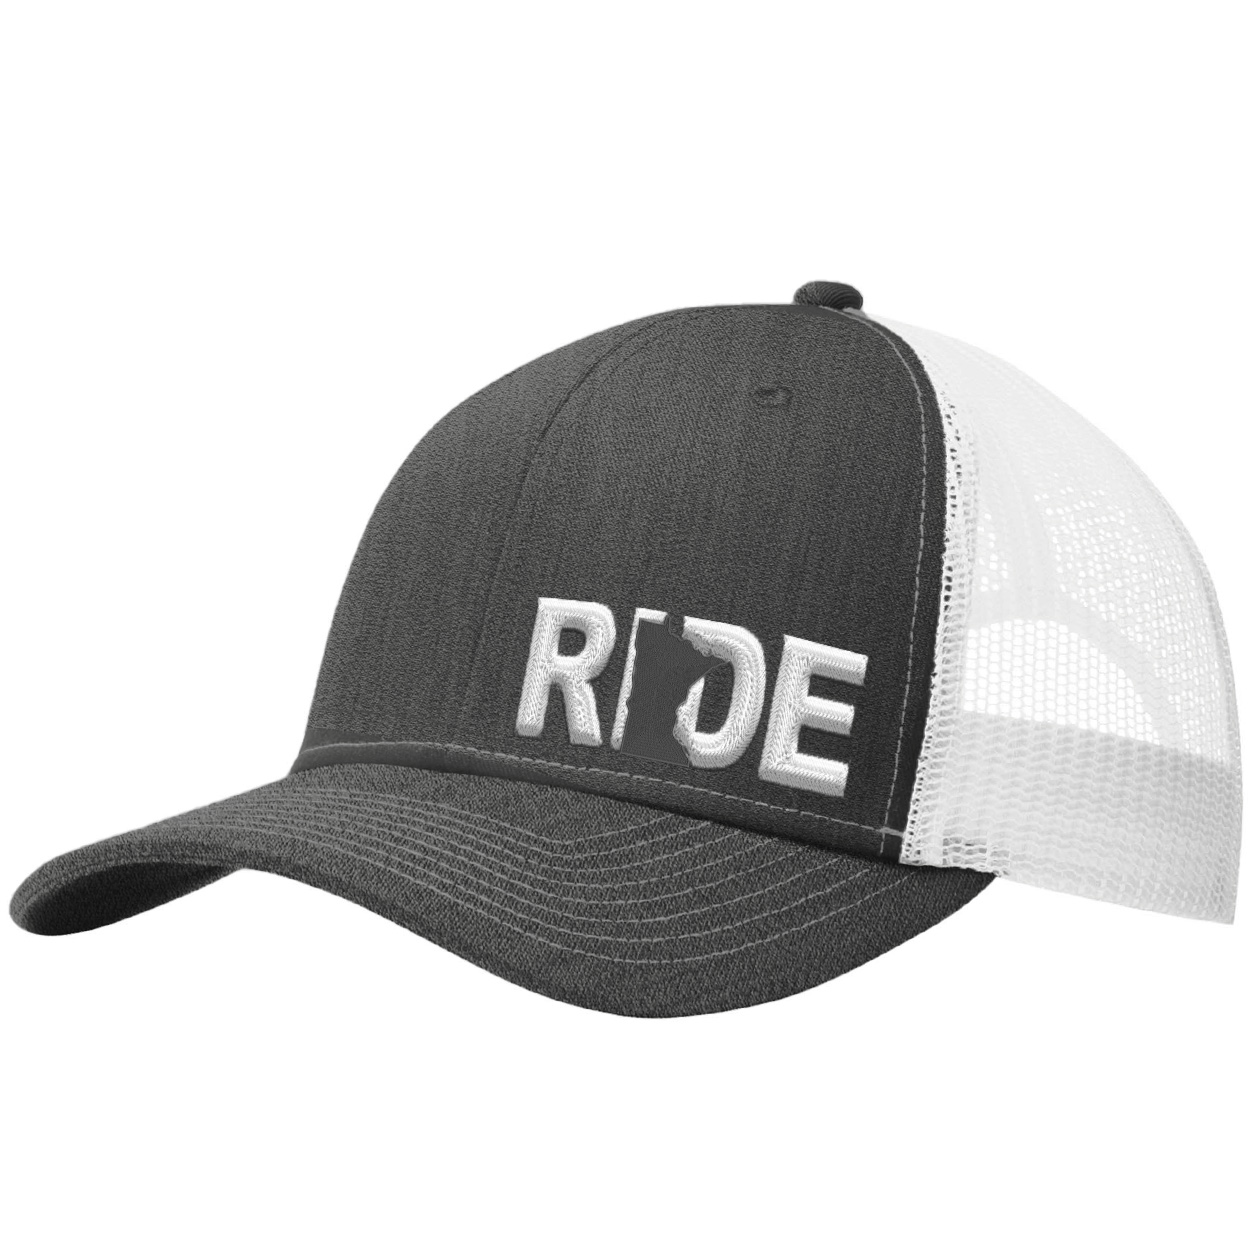 Ride Minnesota Night Out Pro Embroidered Snapback Trucker Hat Gray/White